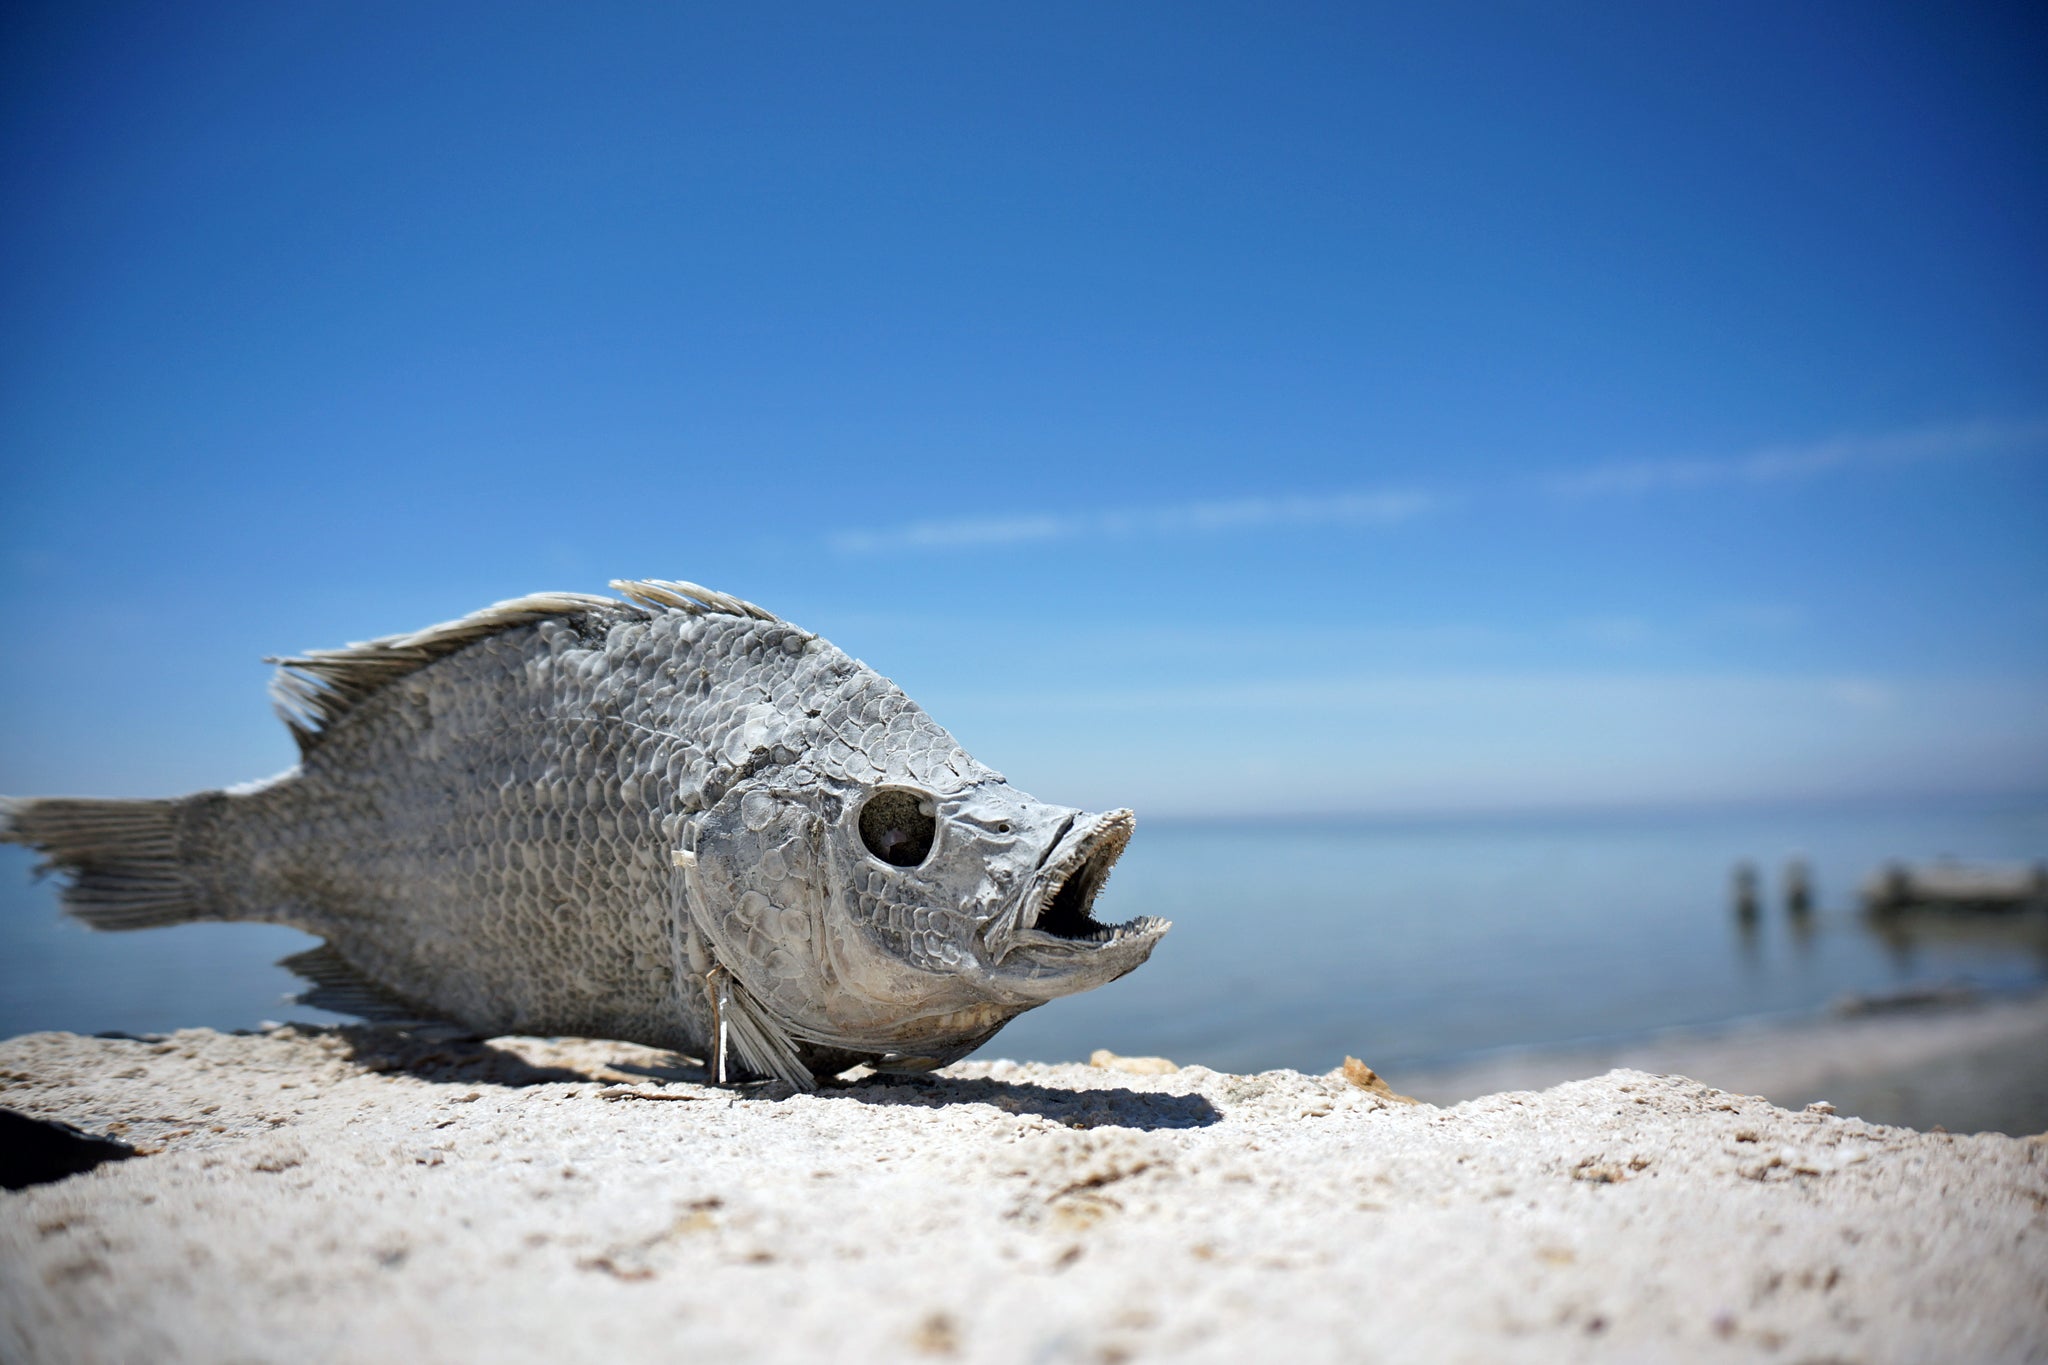 Documentary Points To What Could Happen If Salton Sea Isn't Restored